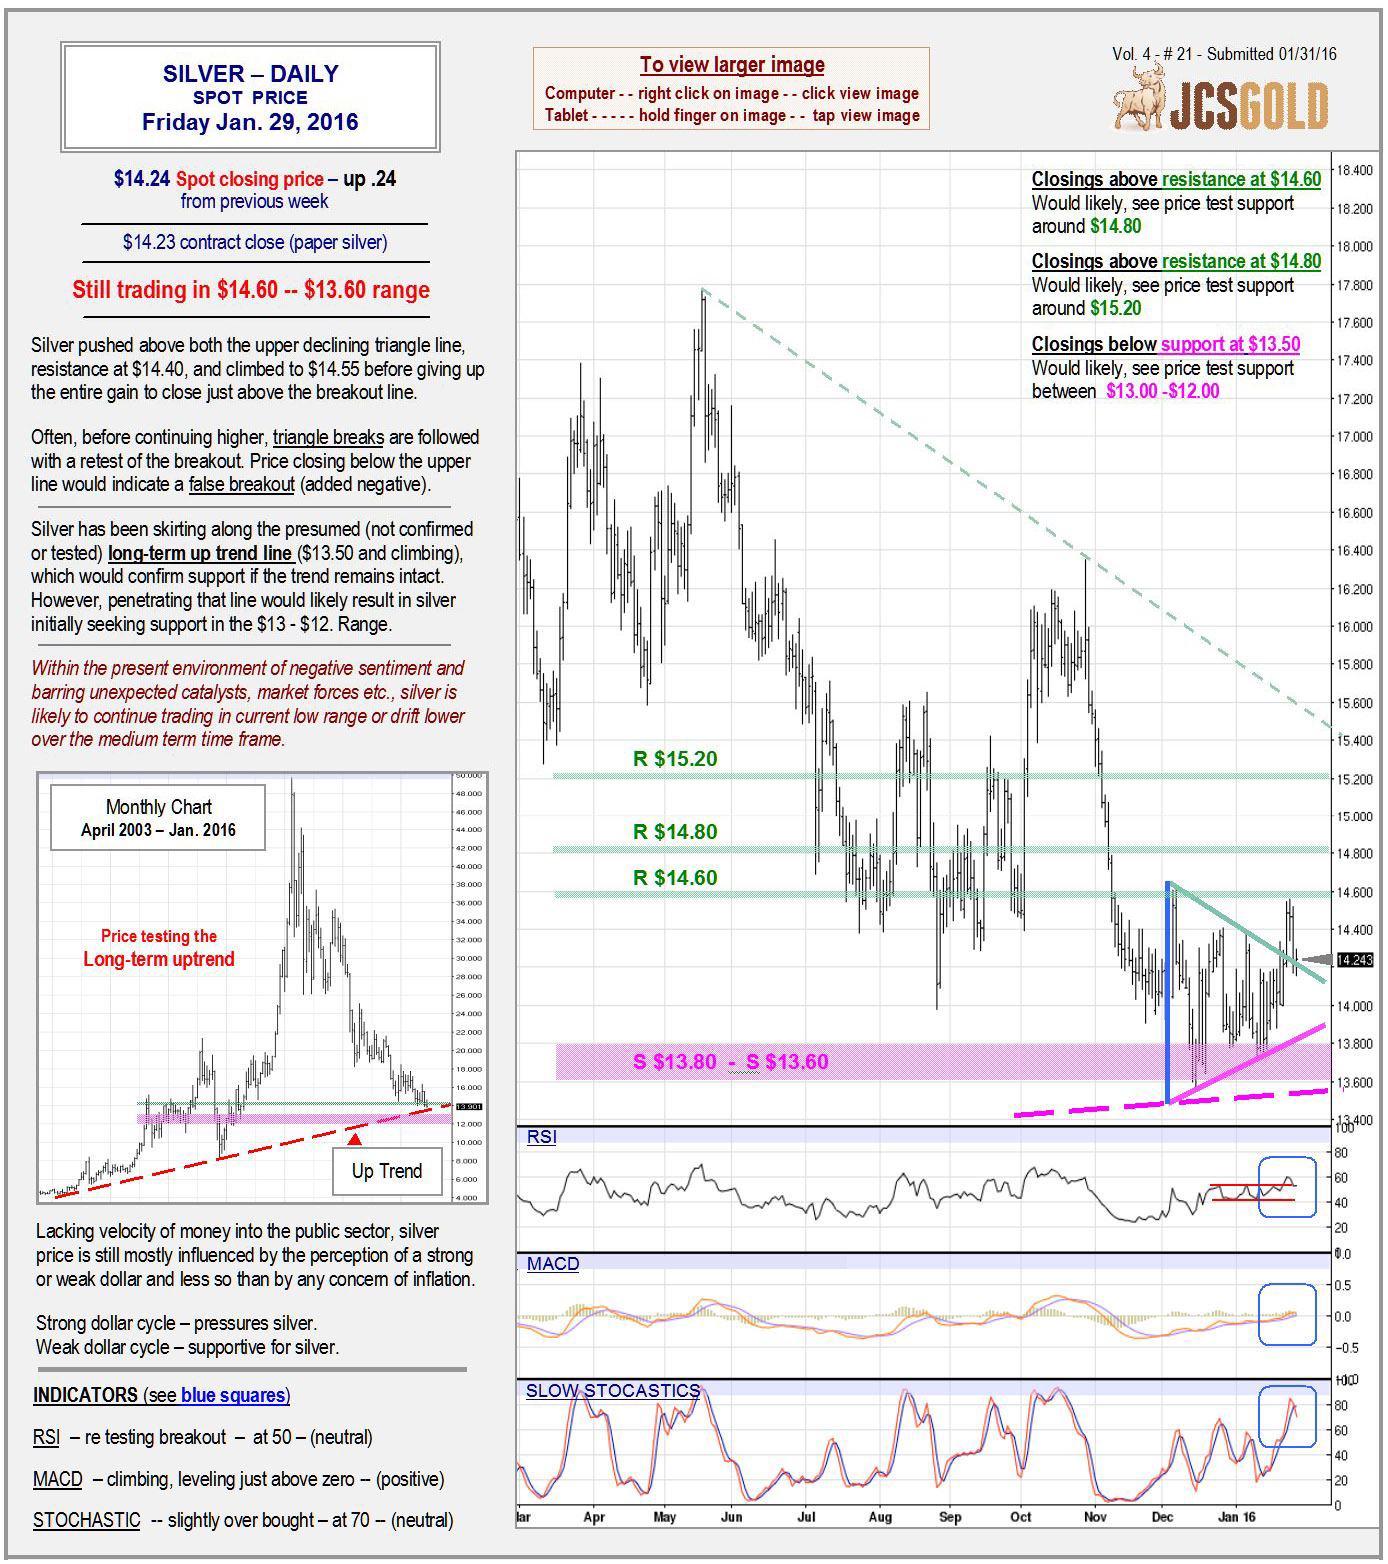 Jan 29, 2016 chart & commentary